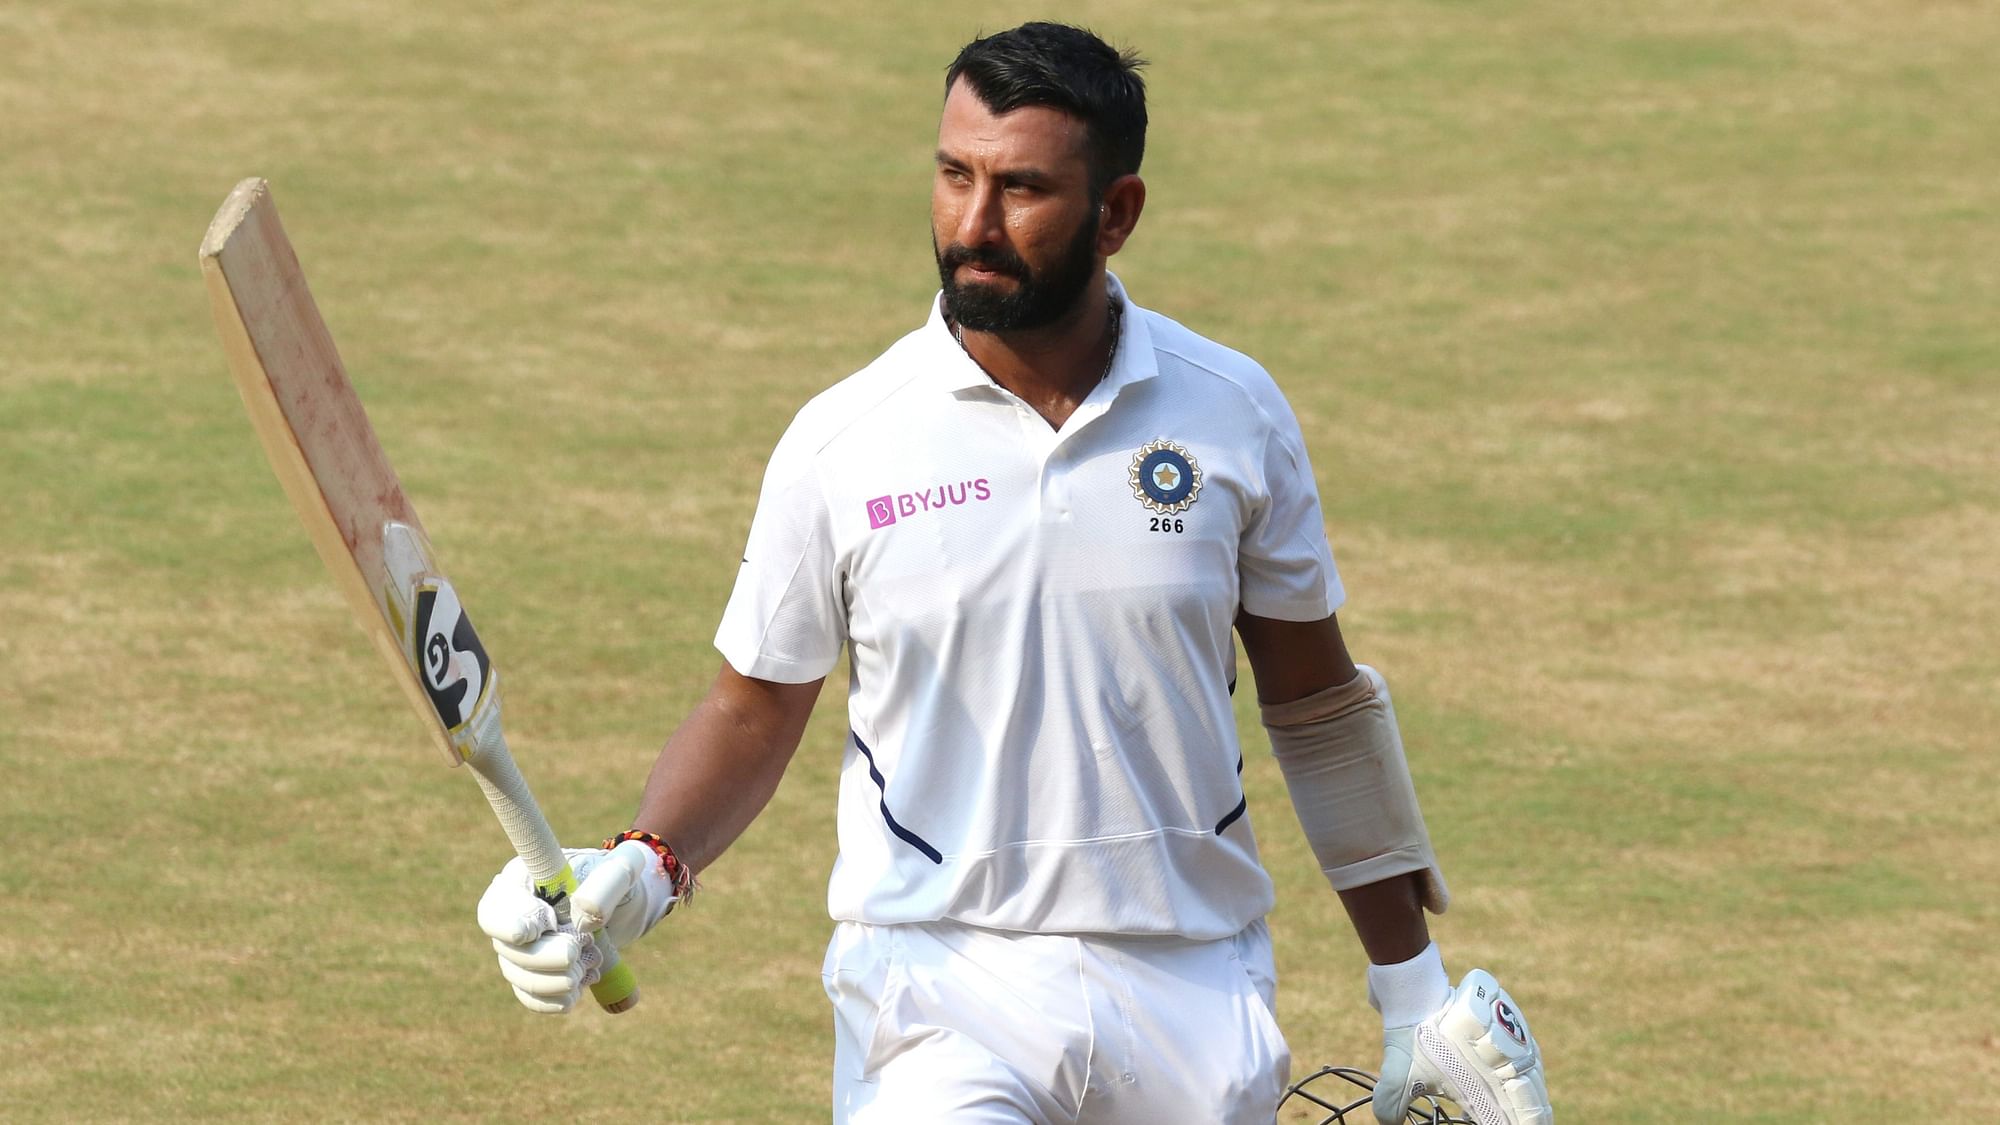  Pujara was recently a part of India’s squad that triumphed over Bangladesh in a two-match Test series in November.